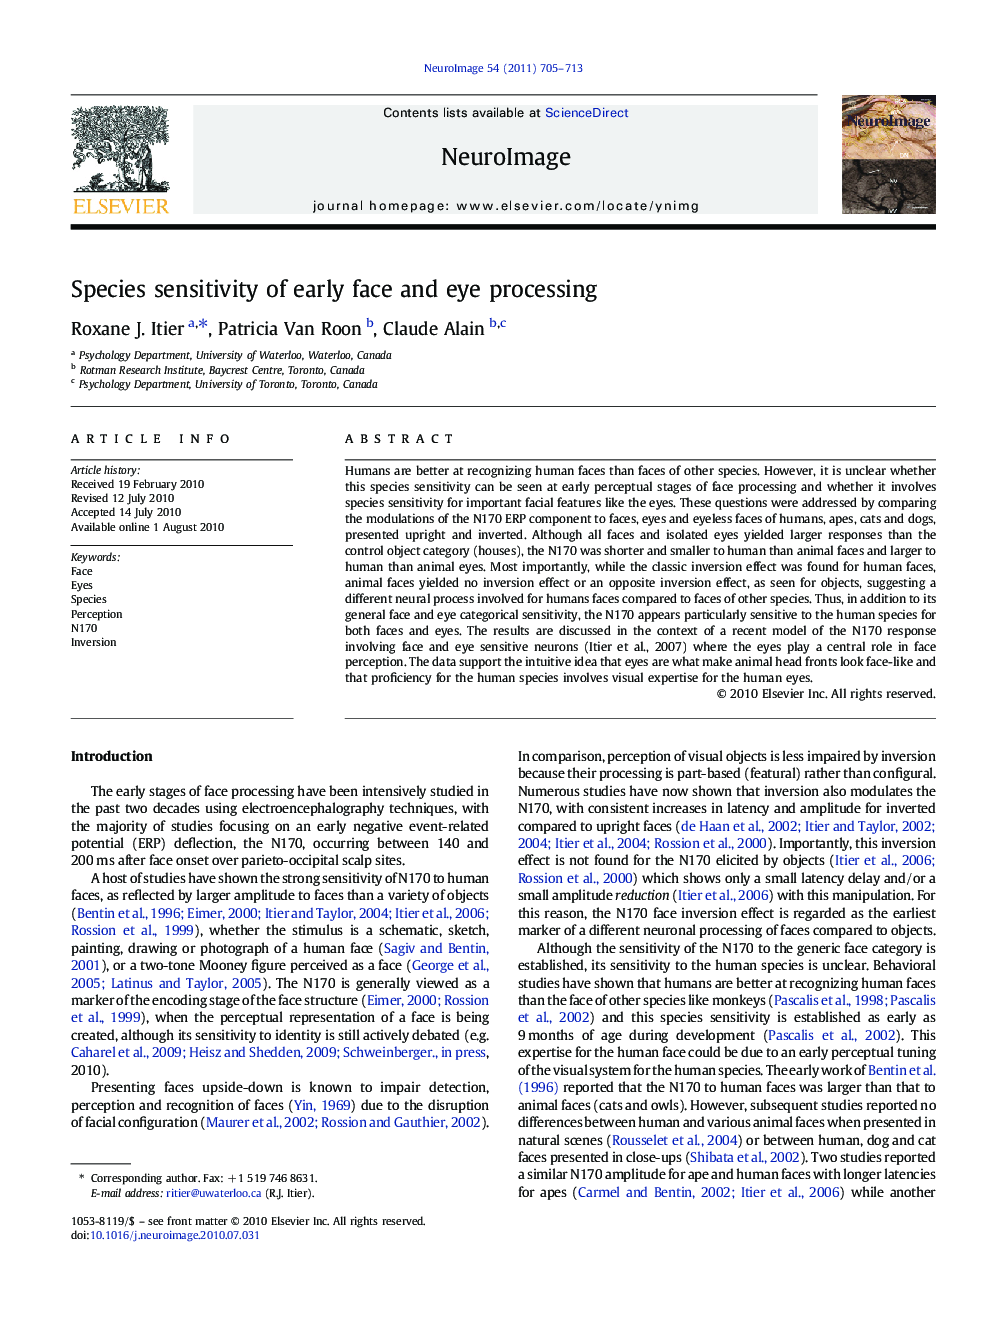 Species sensitivity of early face and eye processing